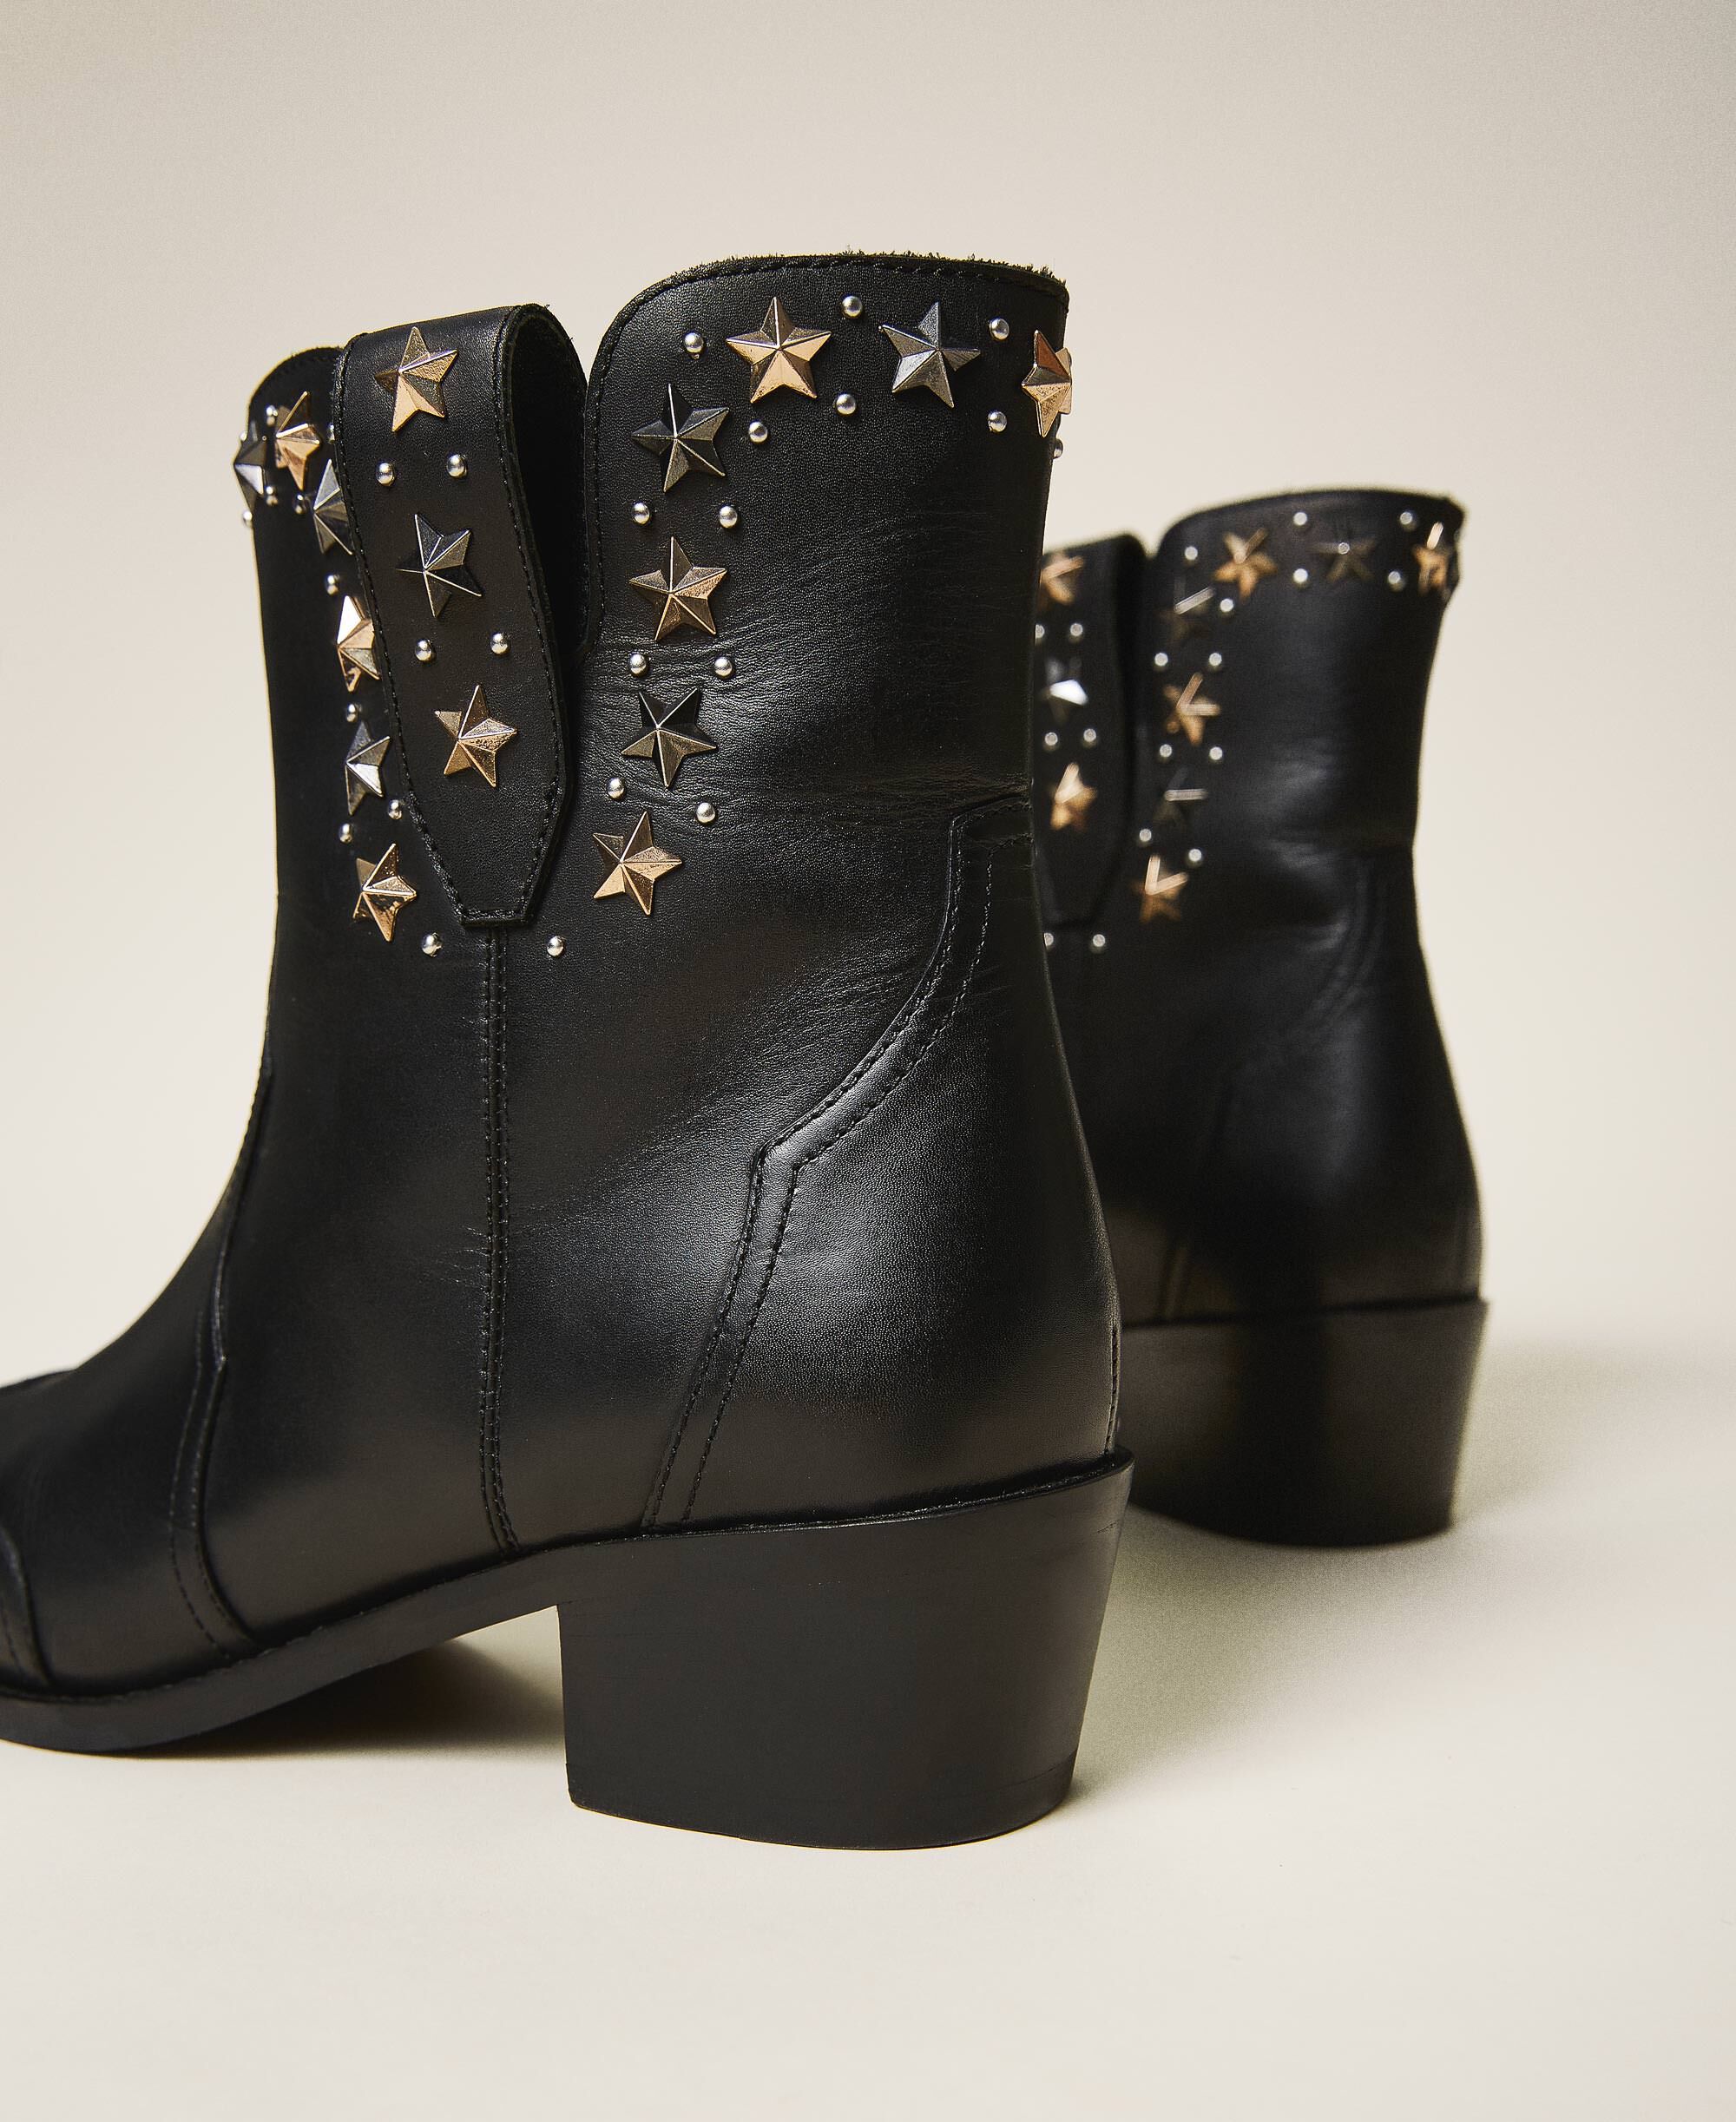 boots with studs on